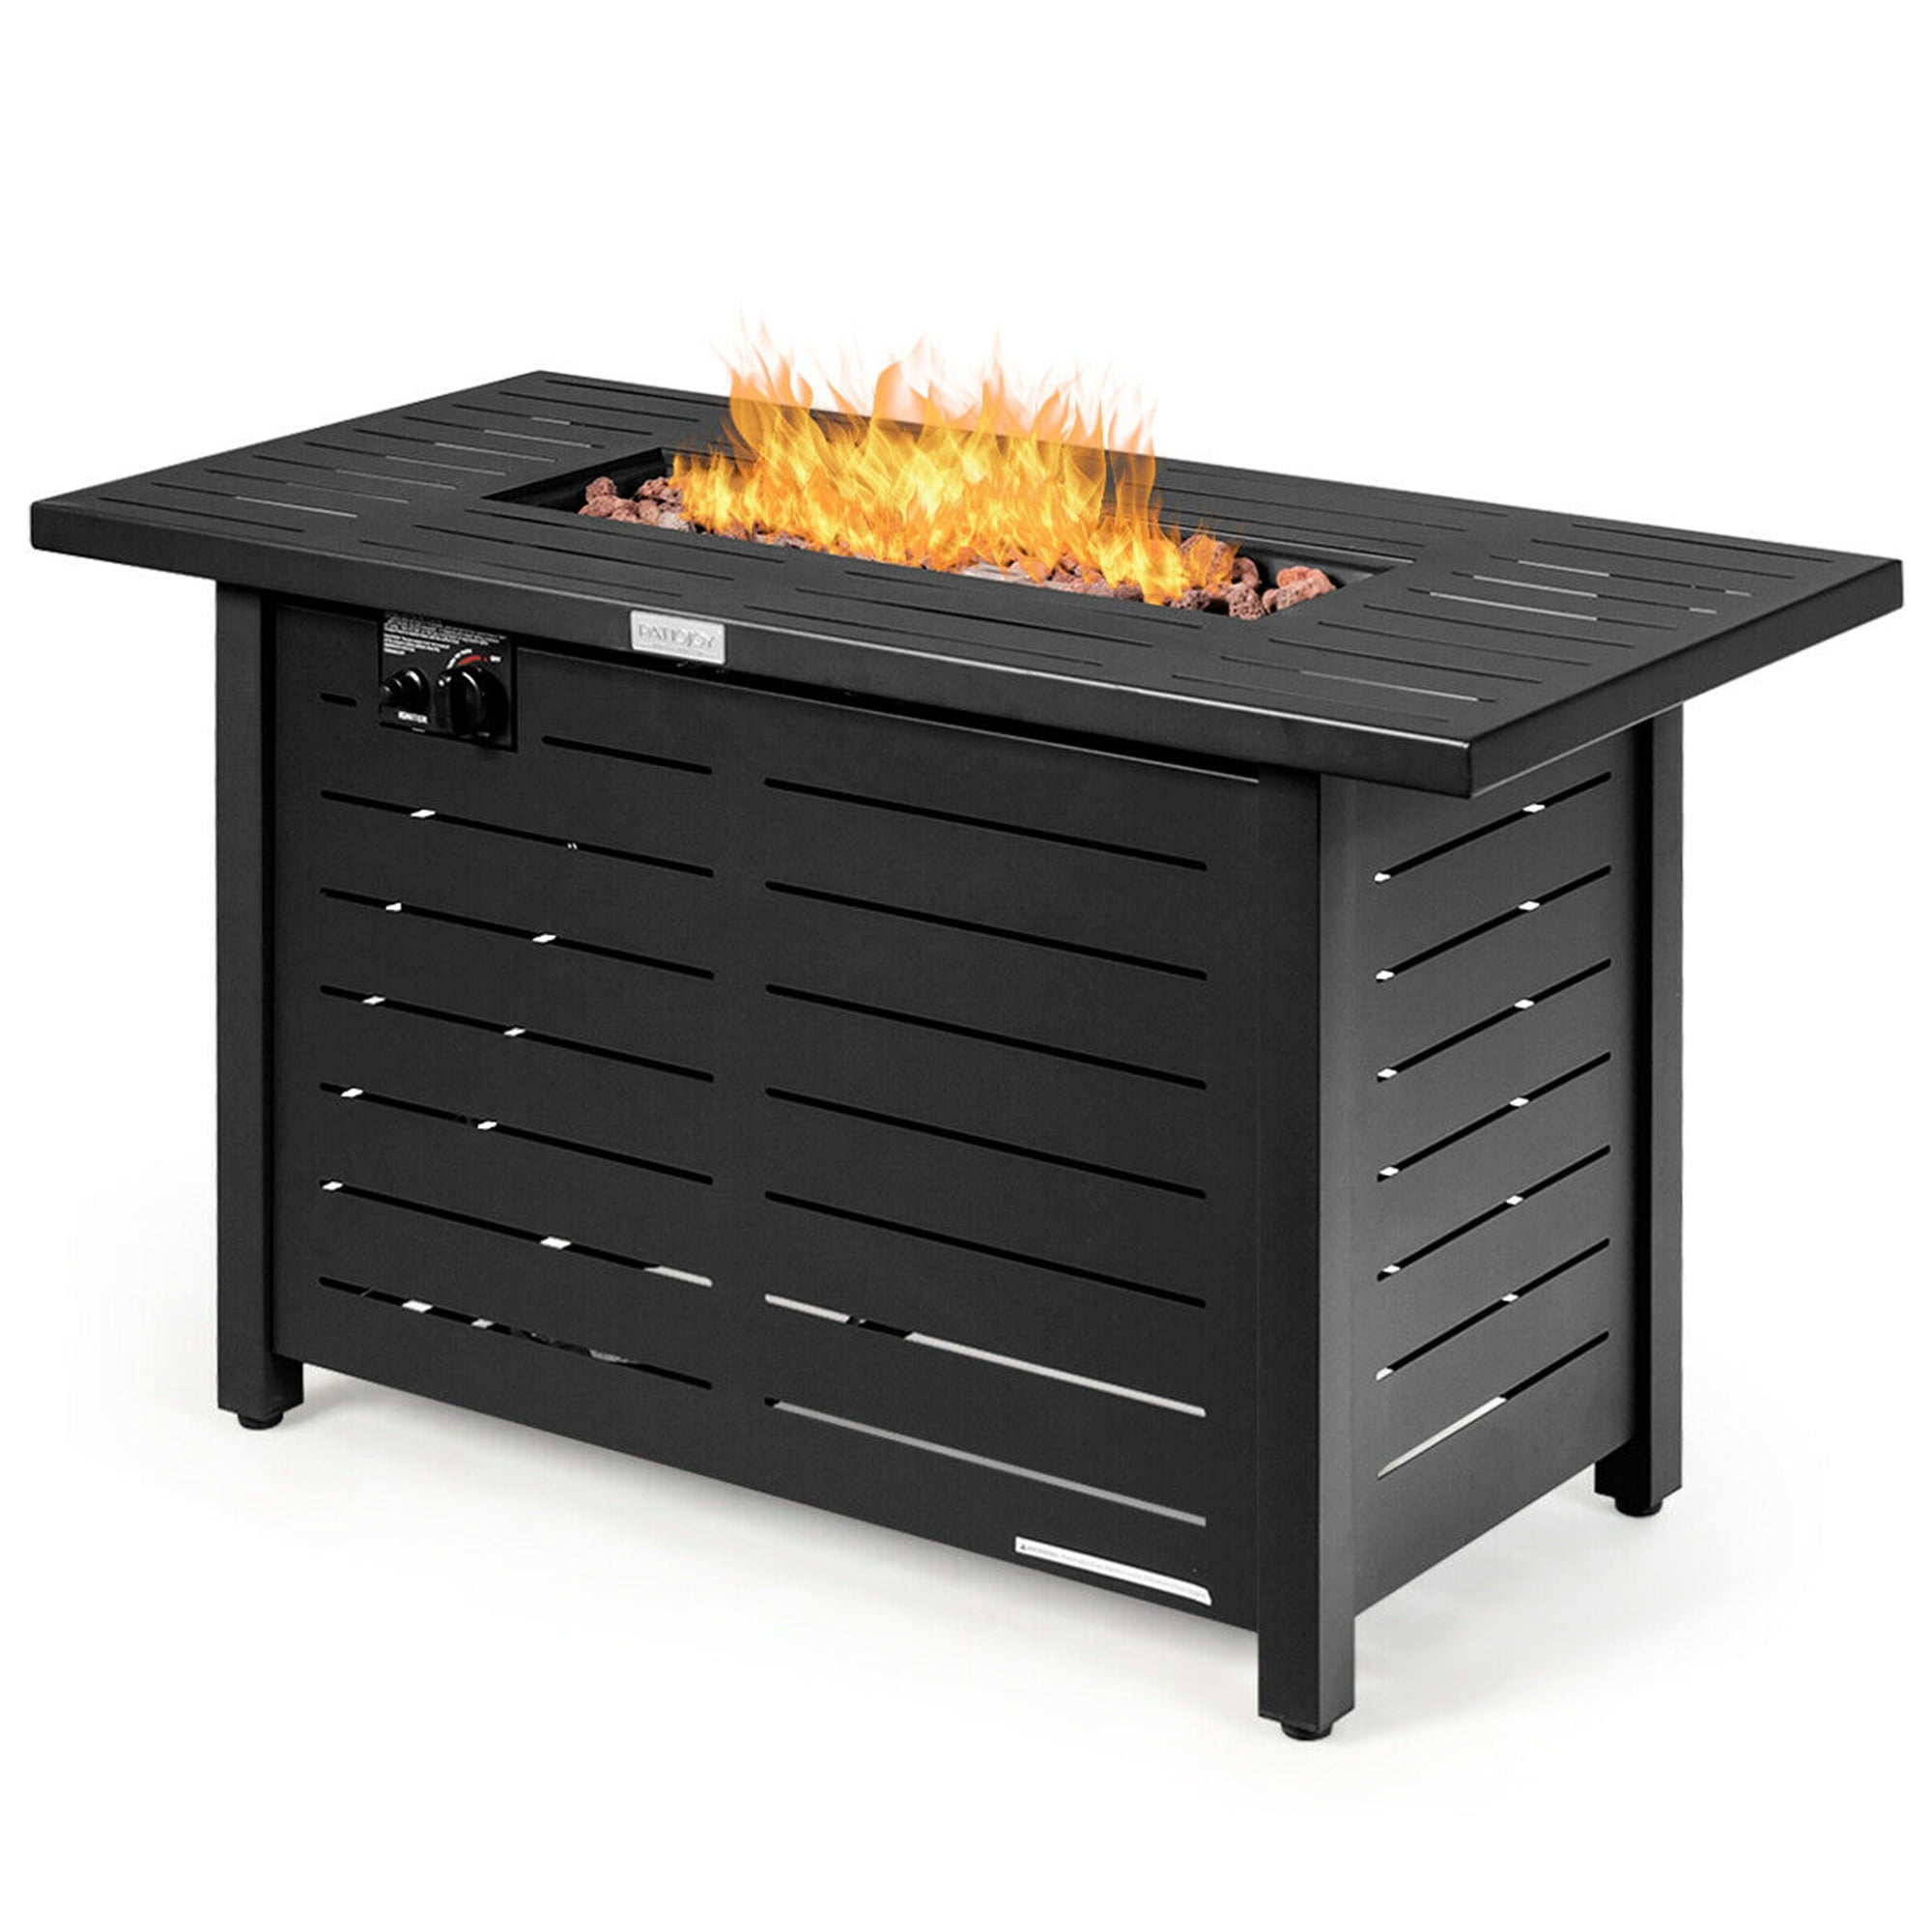 Gymax 42 Rectangular Propane Gas Fire, Propane Fire Pit Table Vs Patio Heater